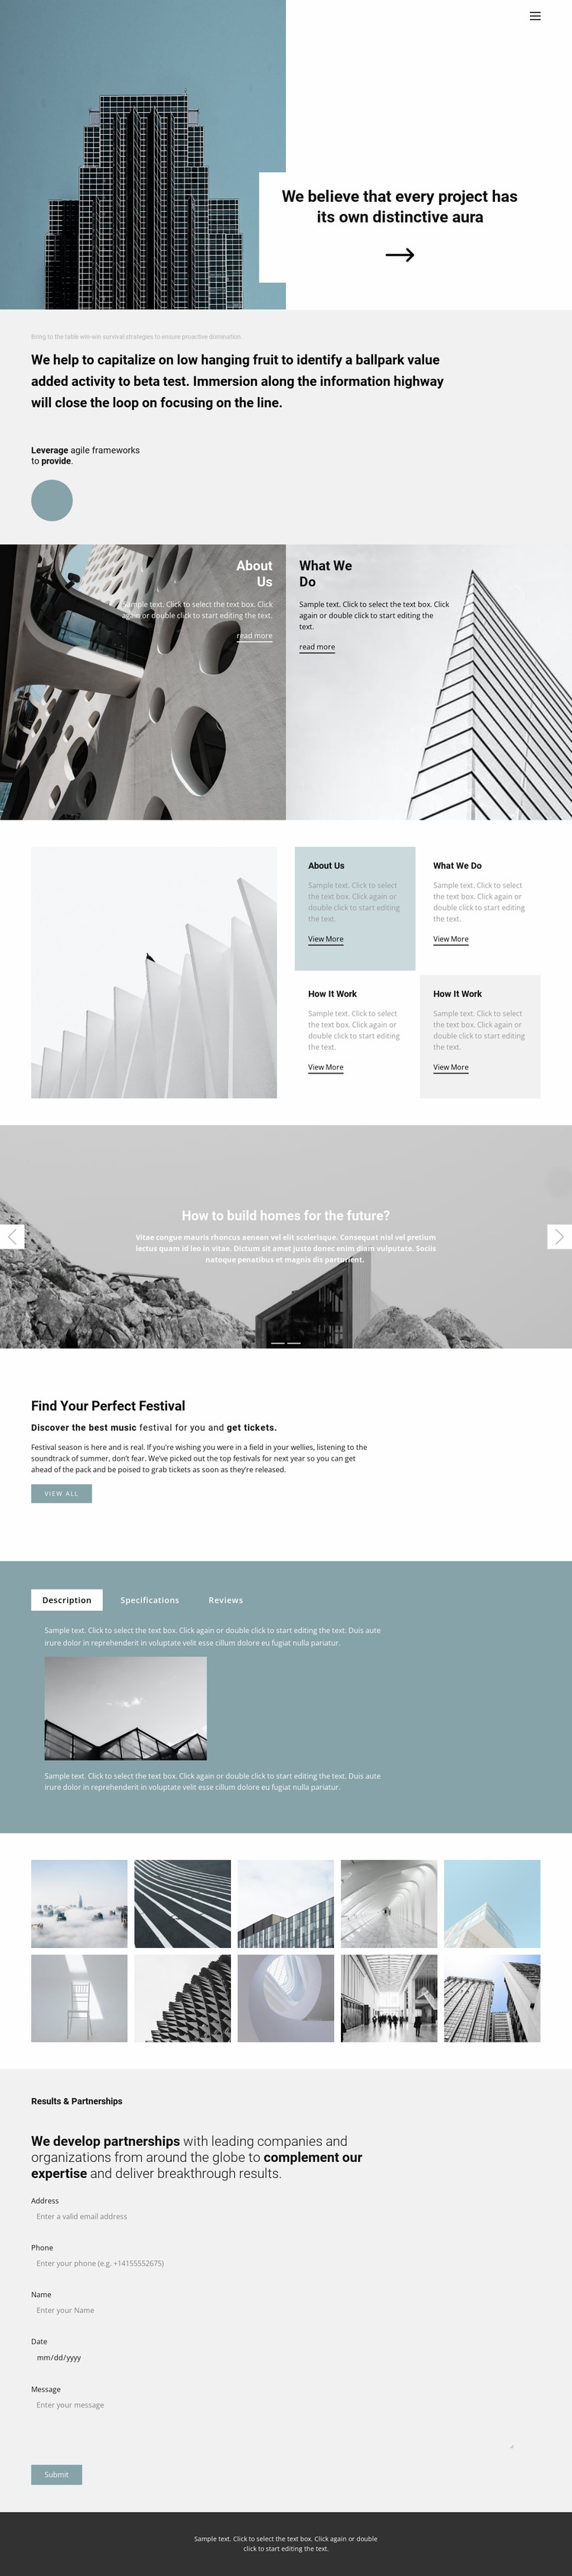 Choose an office for yourself Website Builder Templates